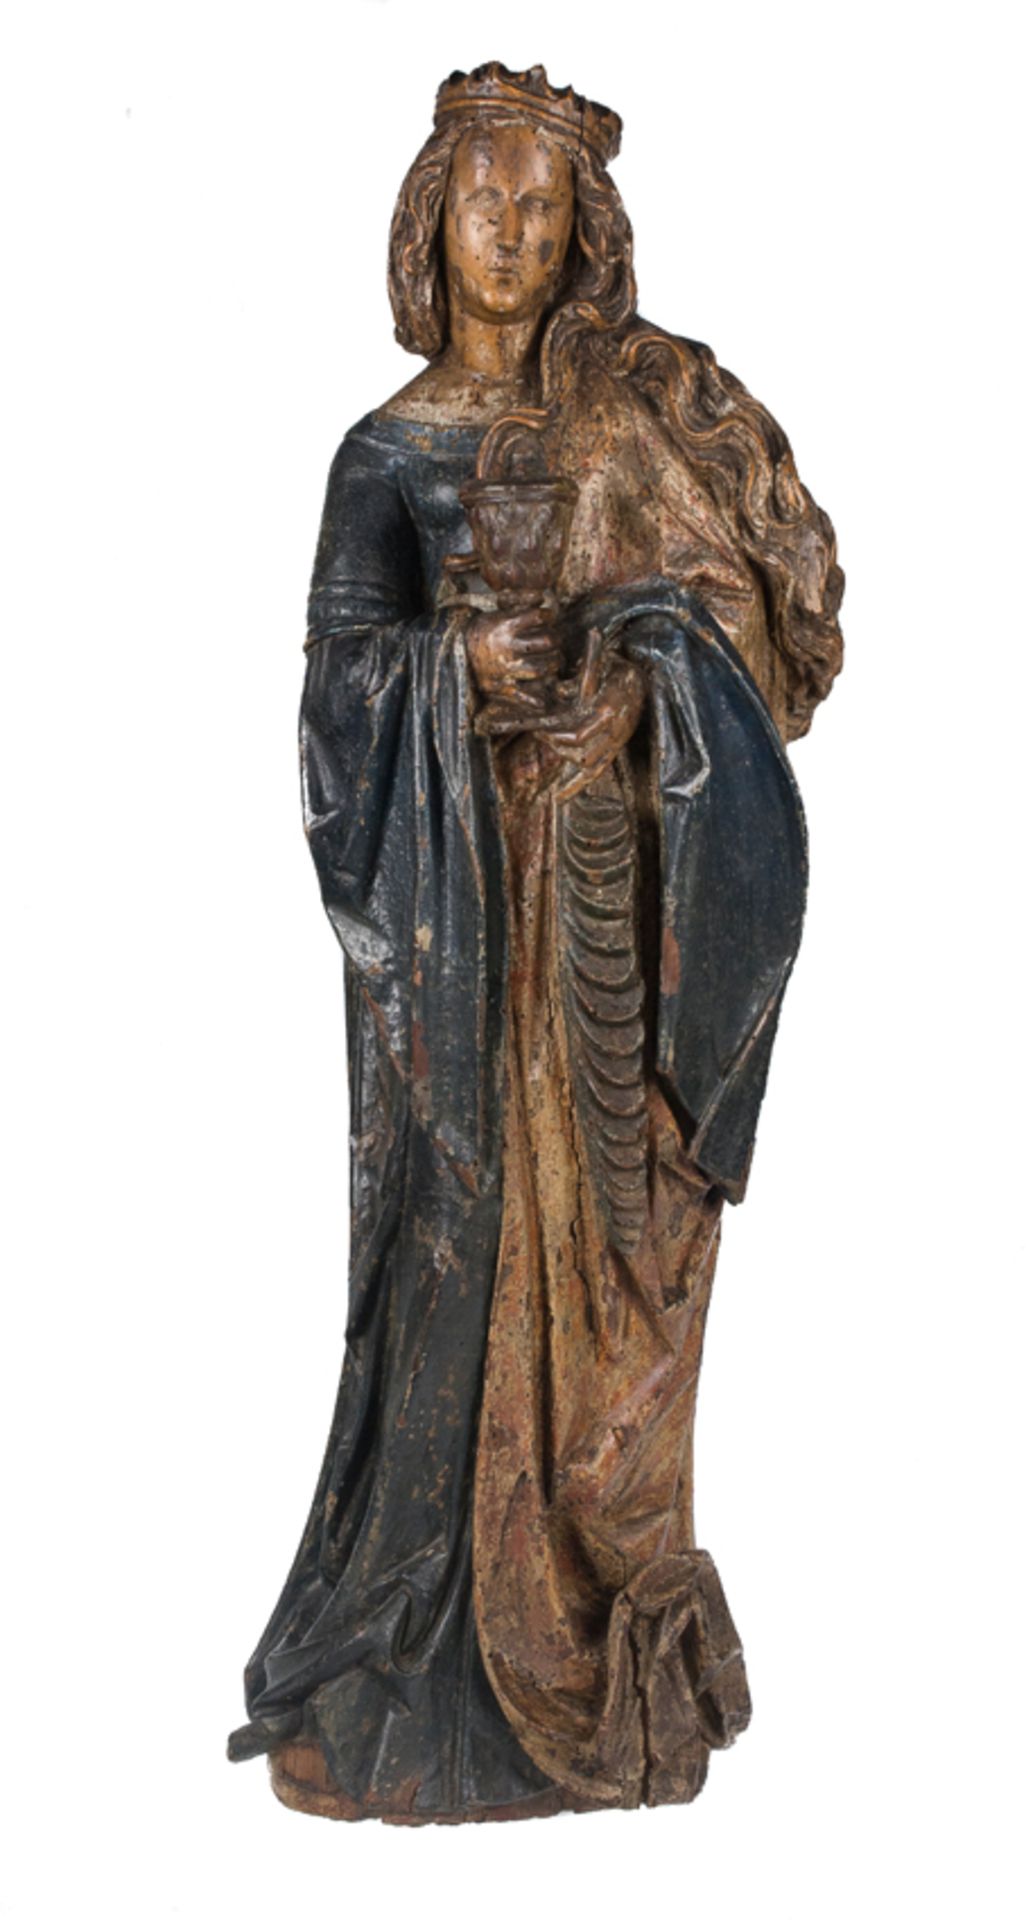 "Saint Margaret ". Carved and polychromed wooden sculpture. Germany. Gothic. 15th century.